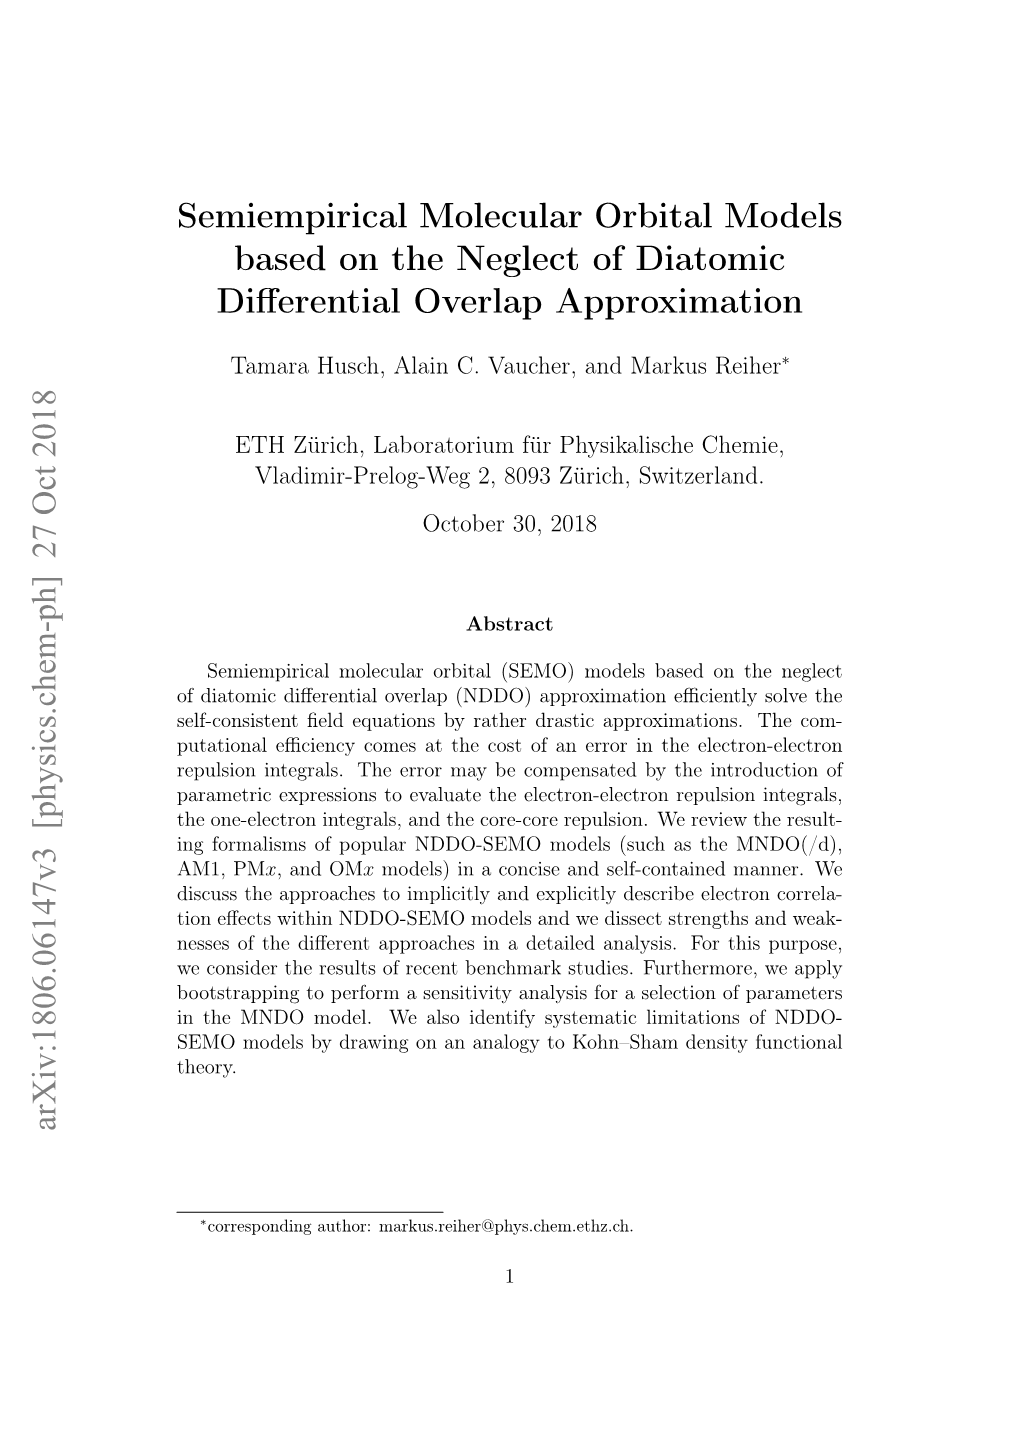 Semiempirical Molecular Orbital Models Based on the Neglect of Diatomic Diﬀerential Overlap Approximation